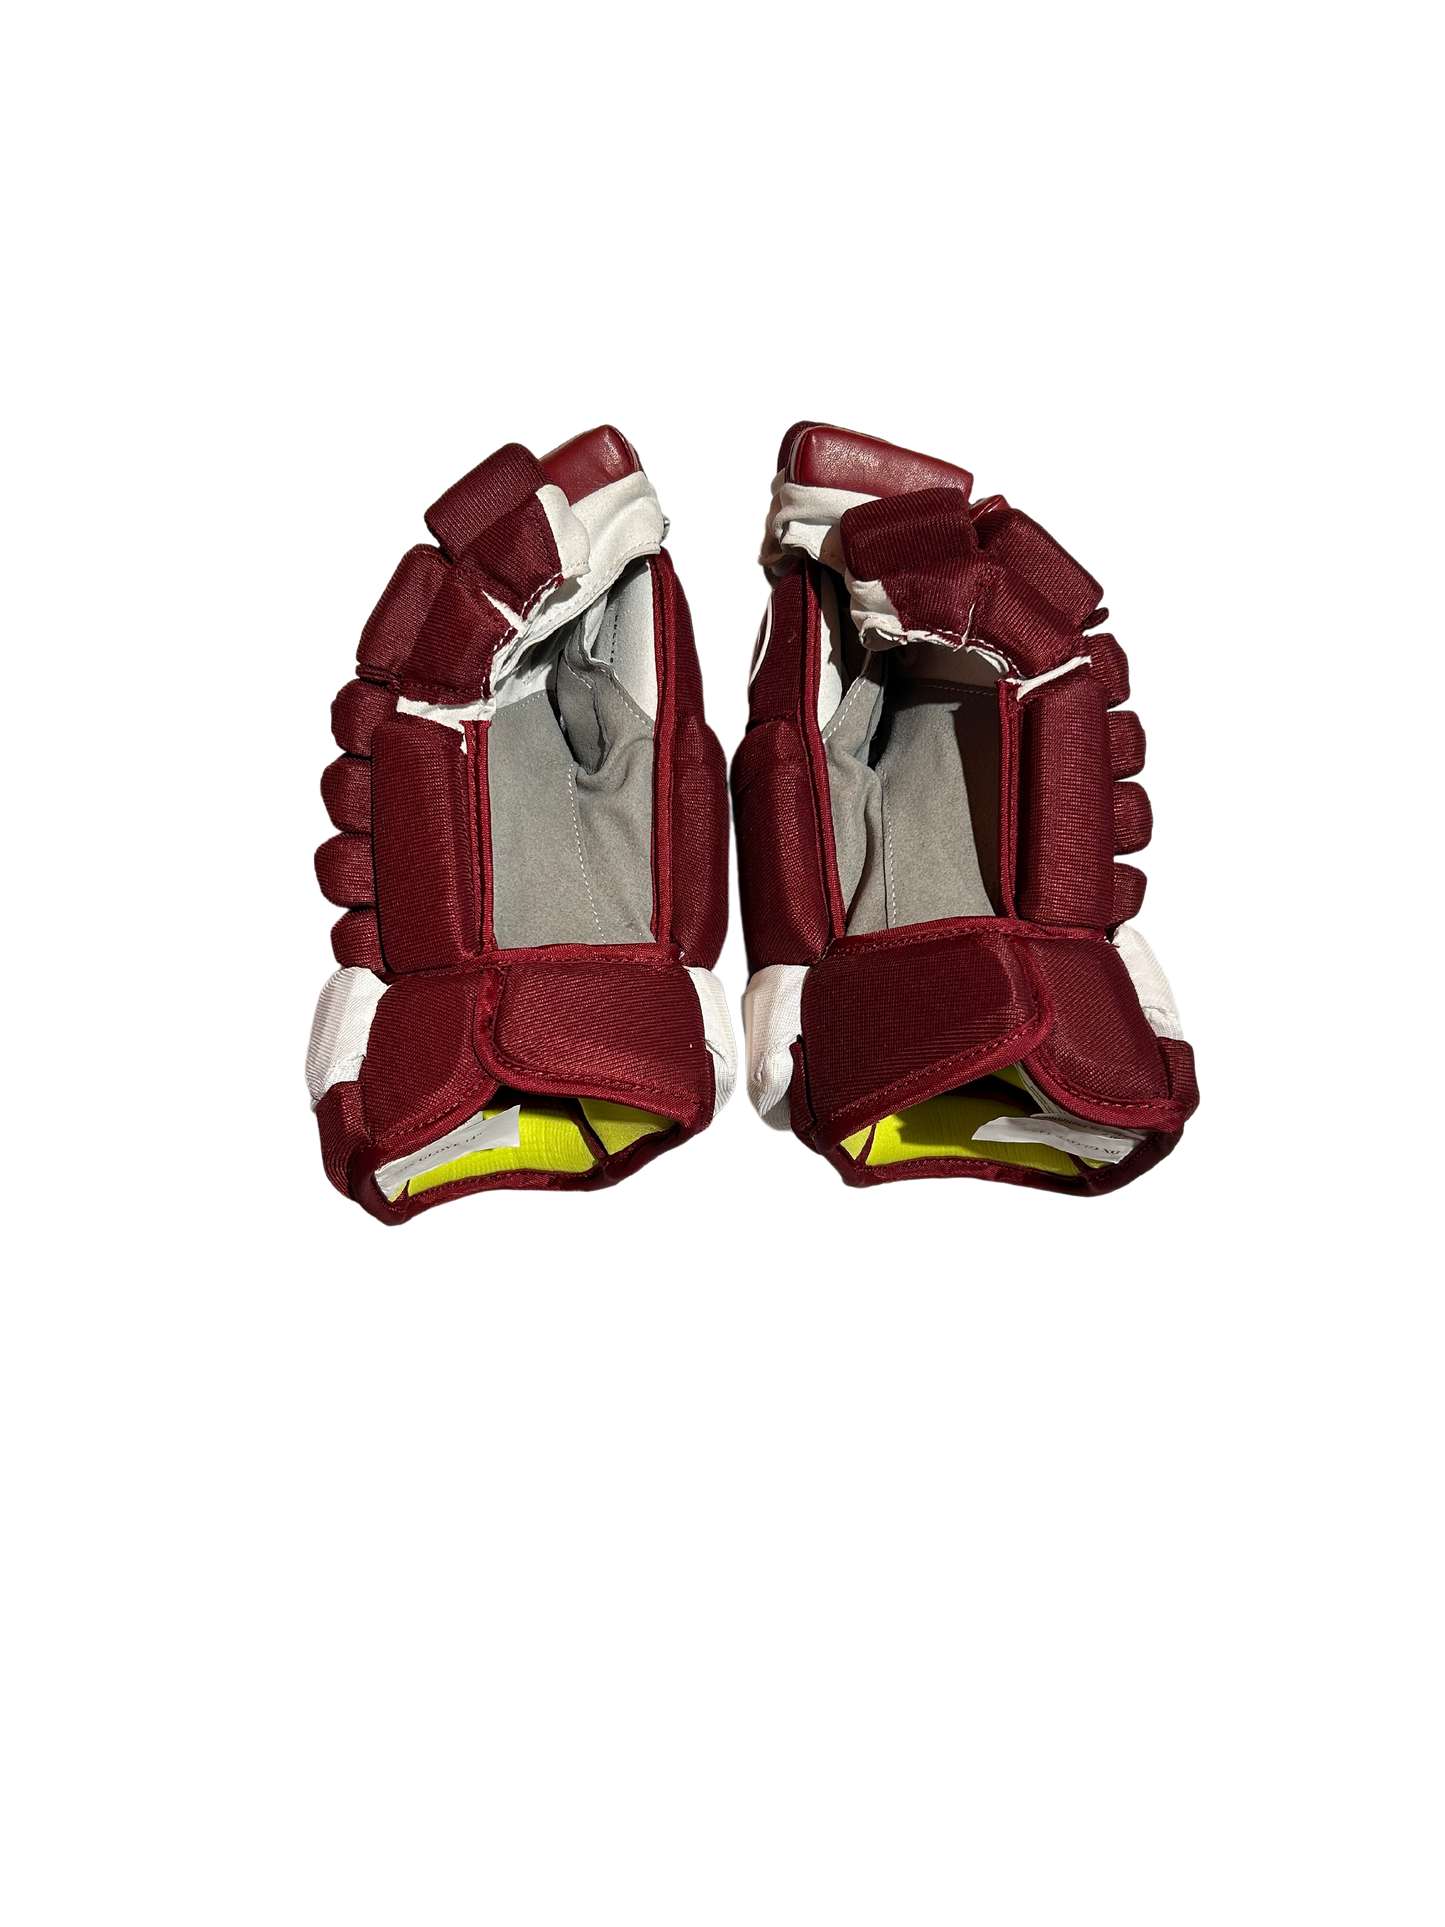 New Team Issued Reverse Retro Colorado Avalanche Warrior Alpha Gloves (Multiple Sizes)